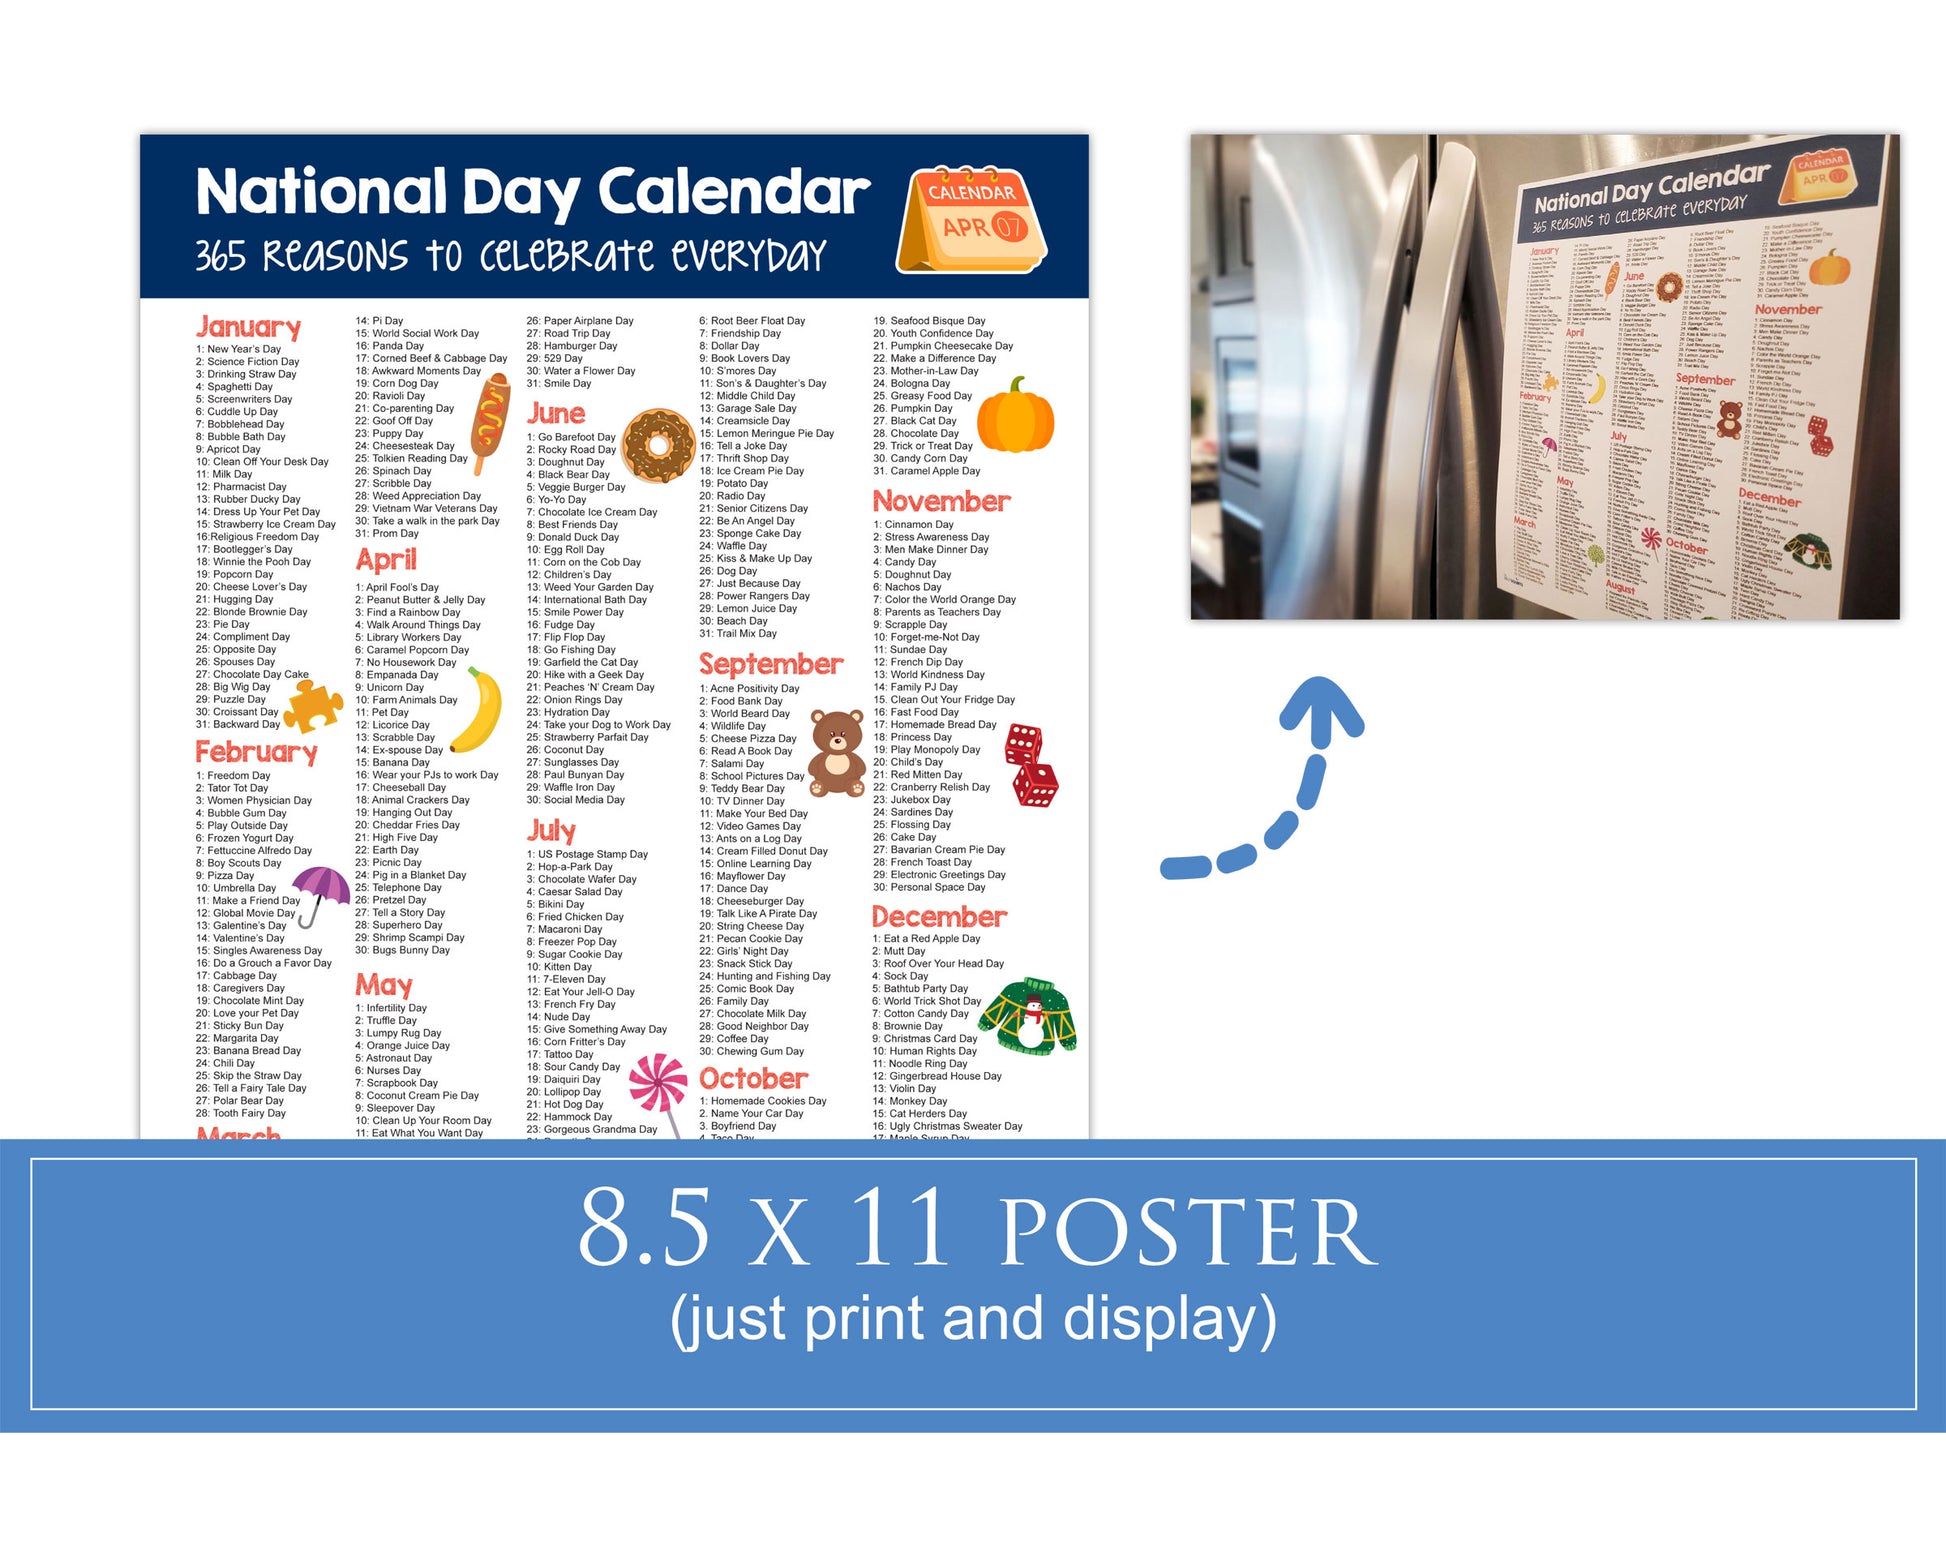 7 STORIES BEHIND OUR FAVORITE GAMES - National Day Calendar